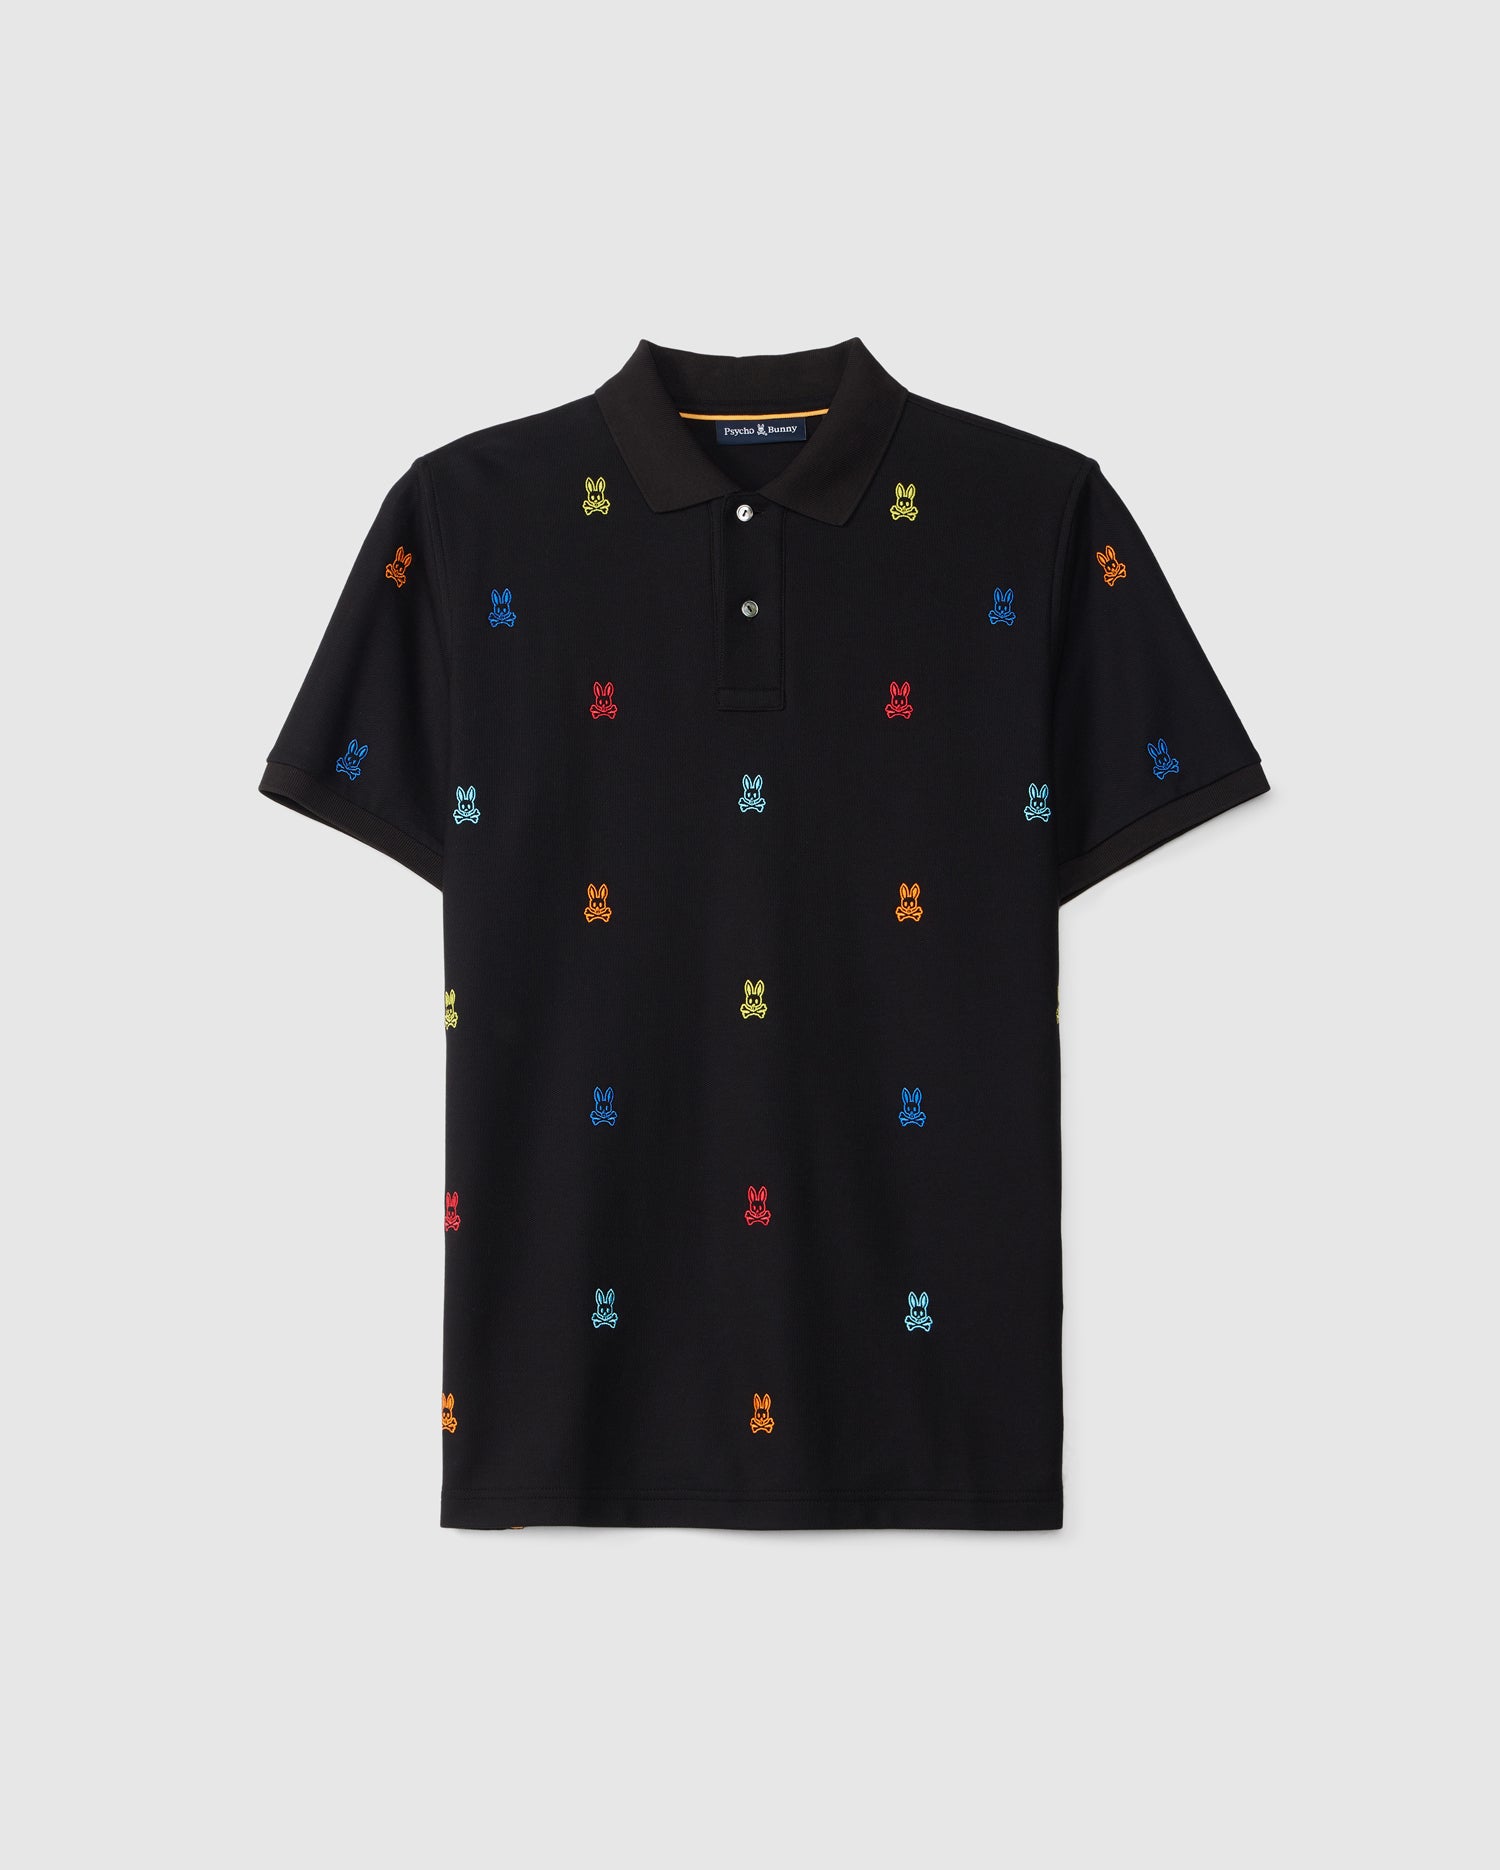 A black short-sleeve MENS BONHAM PIQUE POLO - B6K501C200 featuring a classic collar and button-down front. The ultra-soft Pima cotton fabric displays a multicolor jacquard pattern of small, colorful, embroidered dog faces in red, blue, green, and yellow, evenly spaced across the shirt. This stylish piece is from Psycho Bunny.